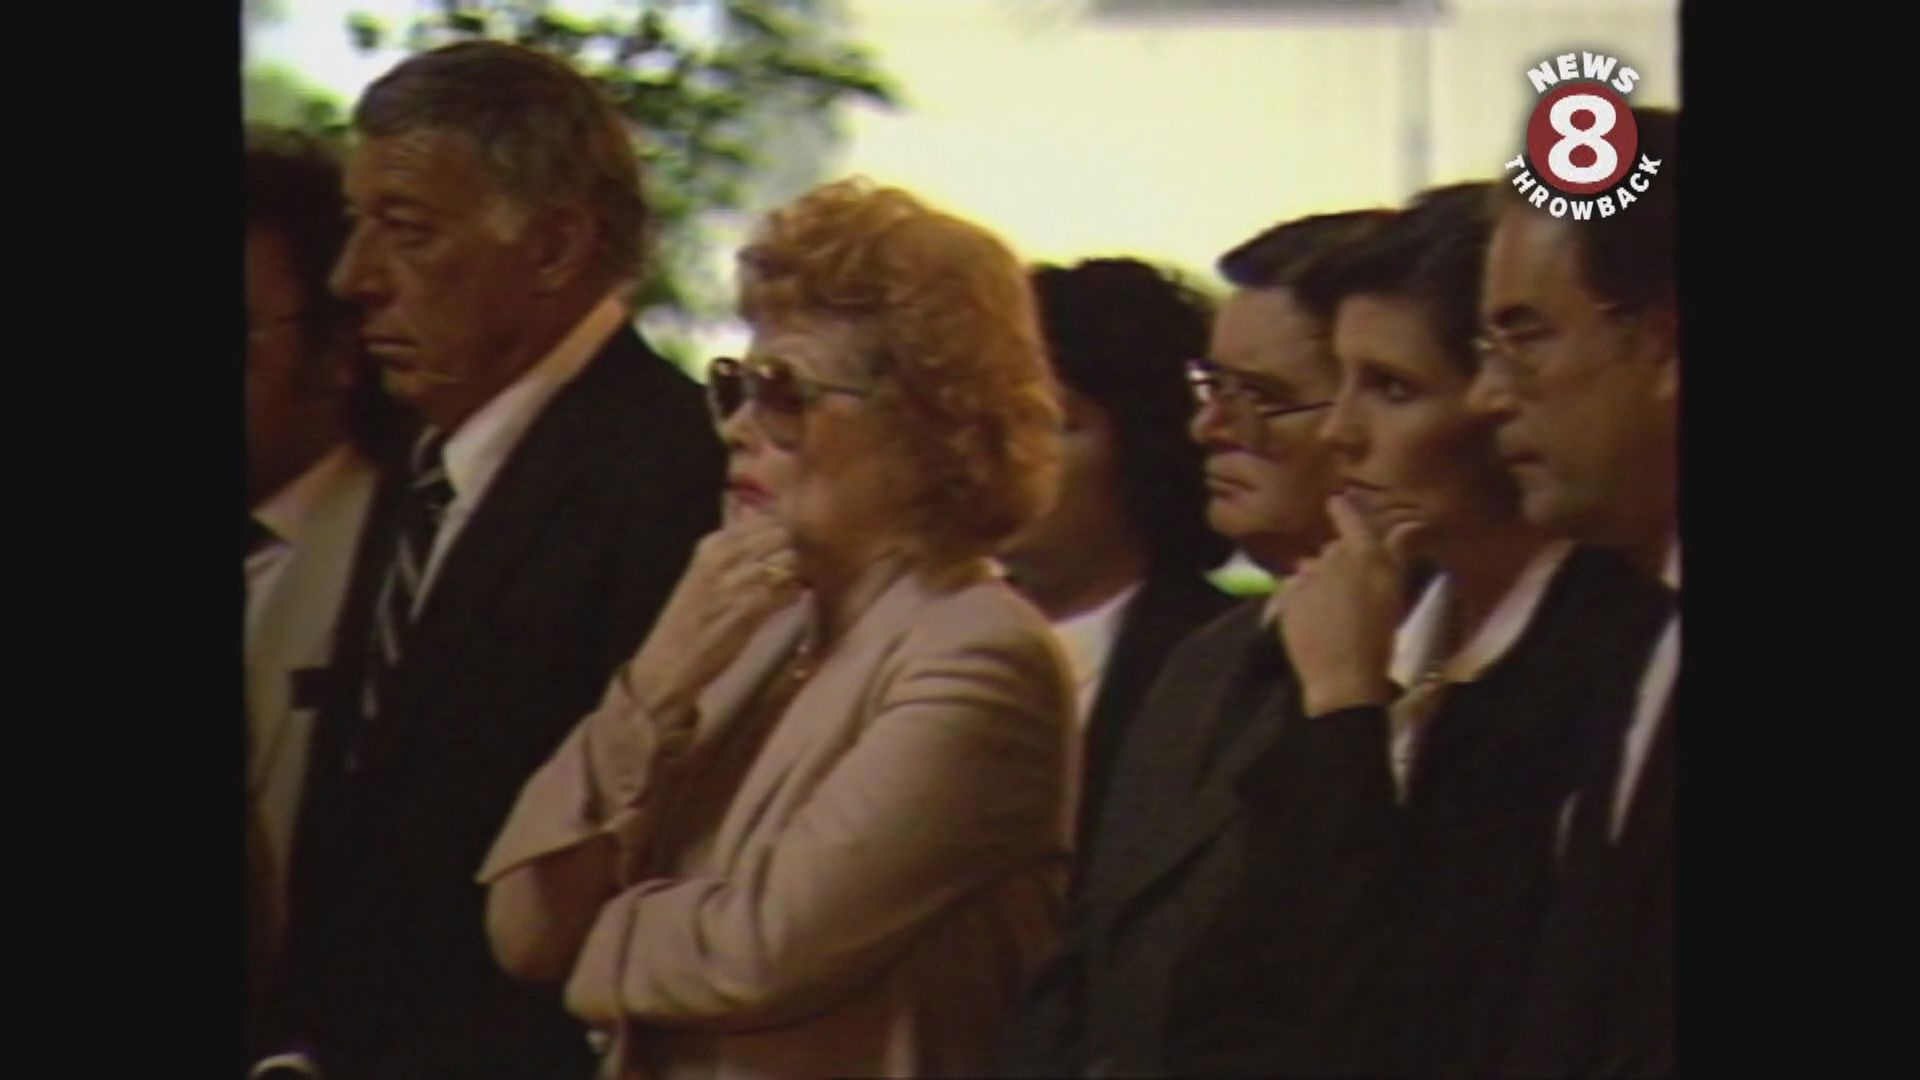 December 4, 1986 The funeral of television legend Desi Arnaz held in San Diego. Lucille Ball, Desi Arnaz Jr., Lucie Arnaz, and Danny Thomas among the mourners.